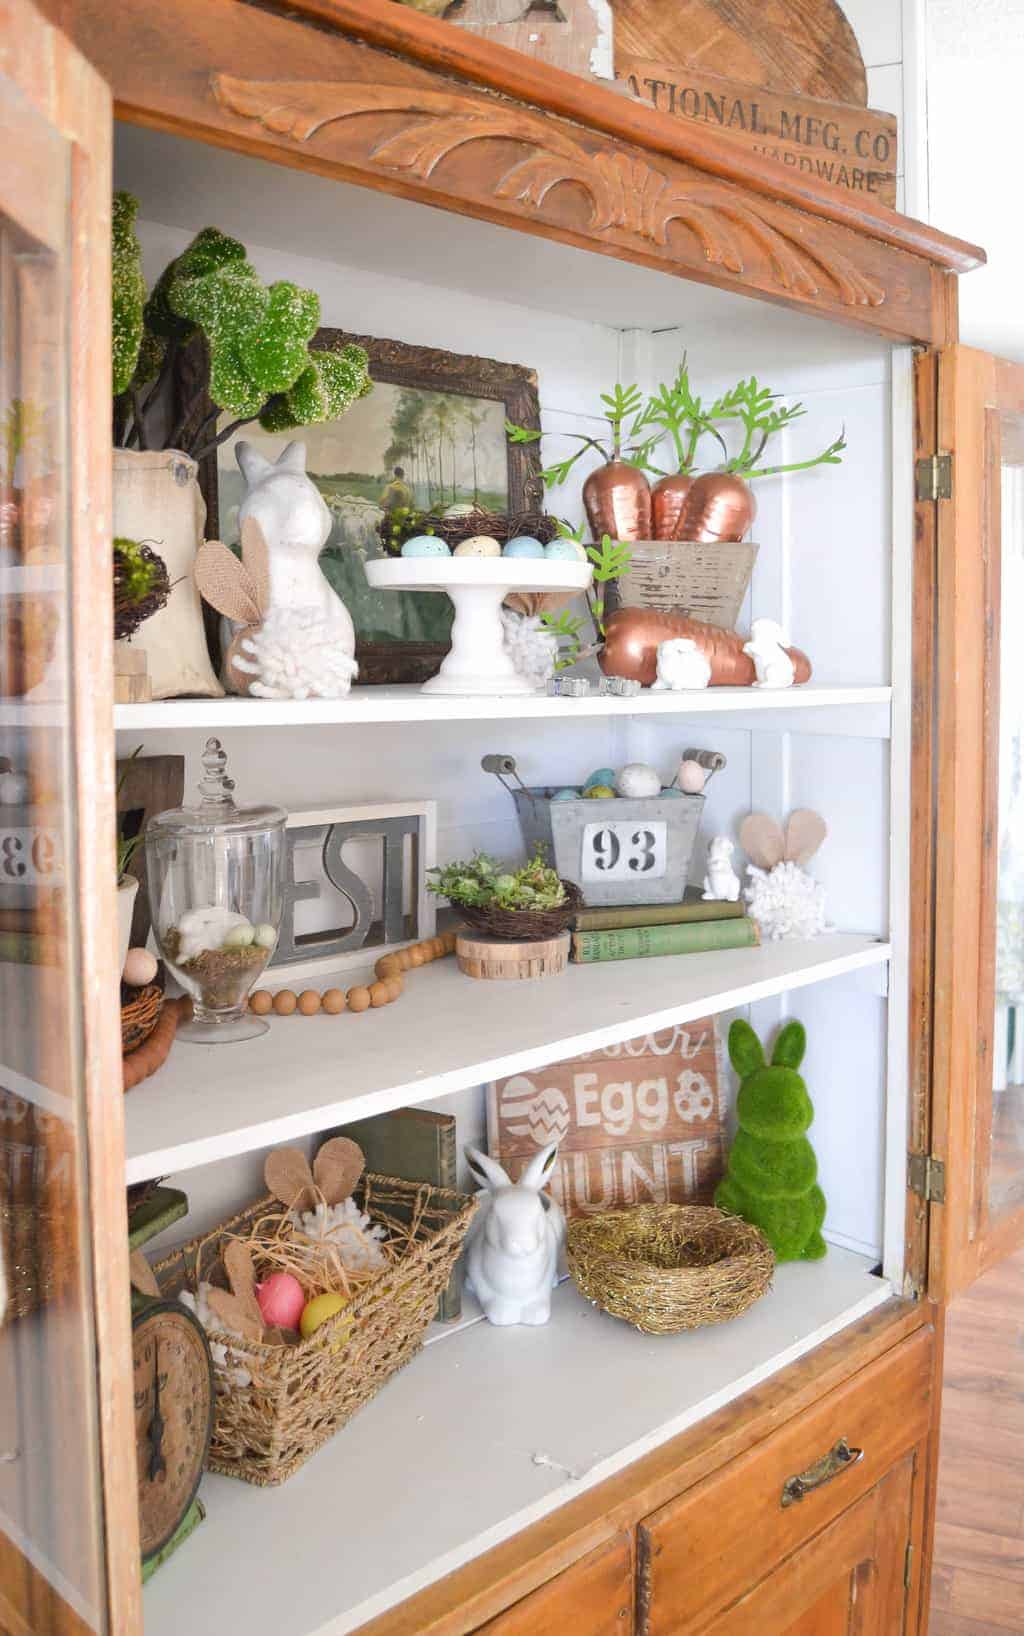 Spring Home Decor Adding Spring To The New Hutch - My Creative Days